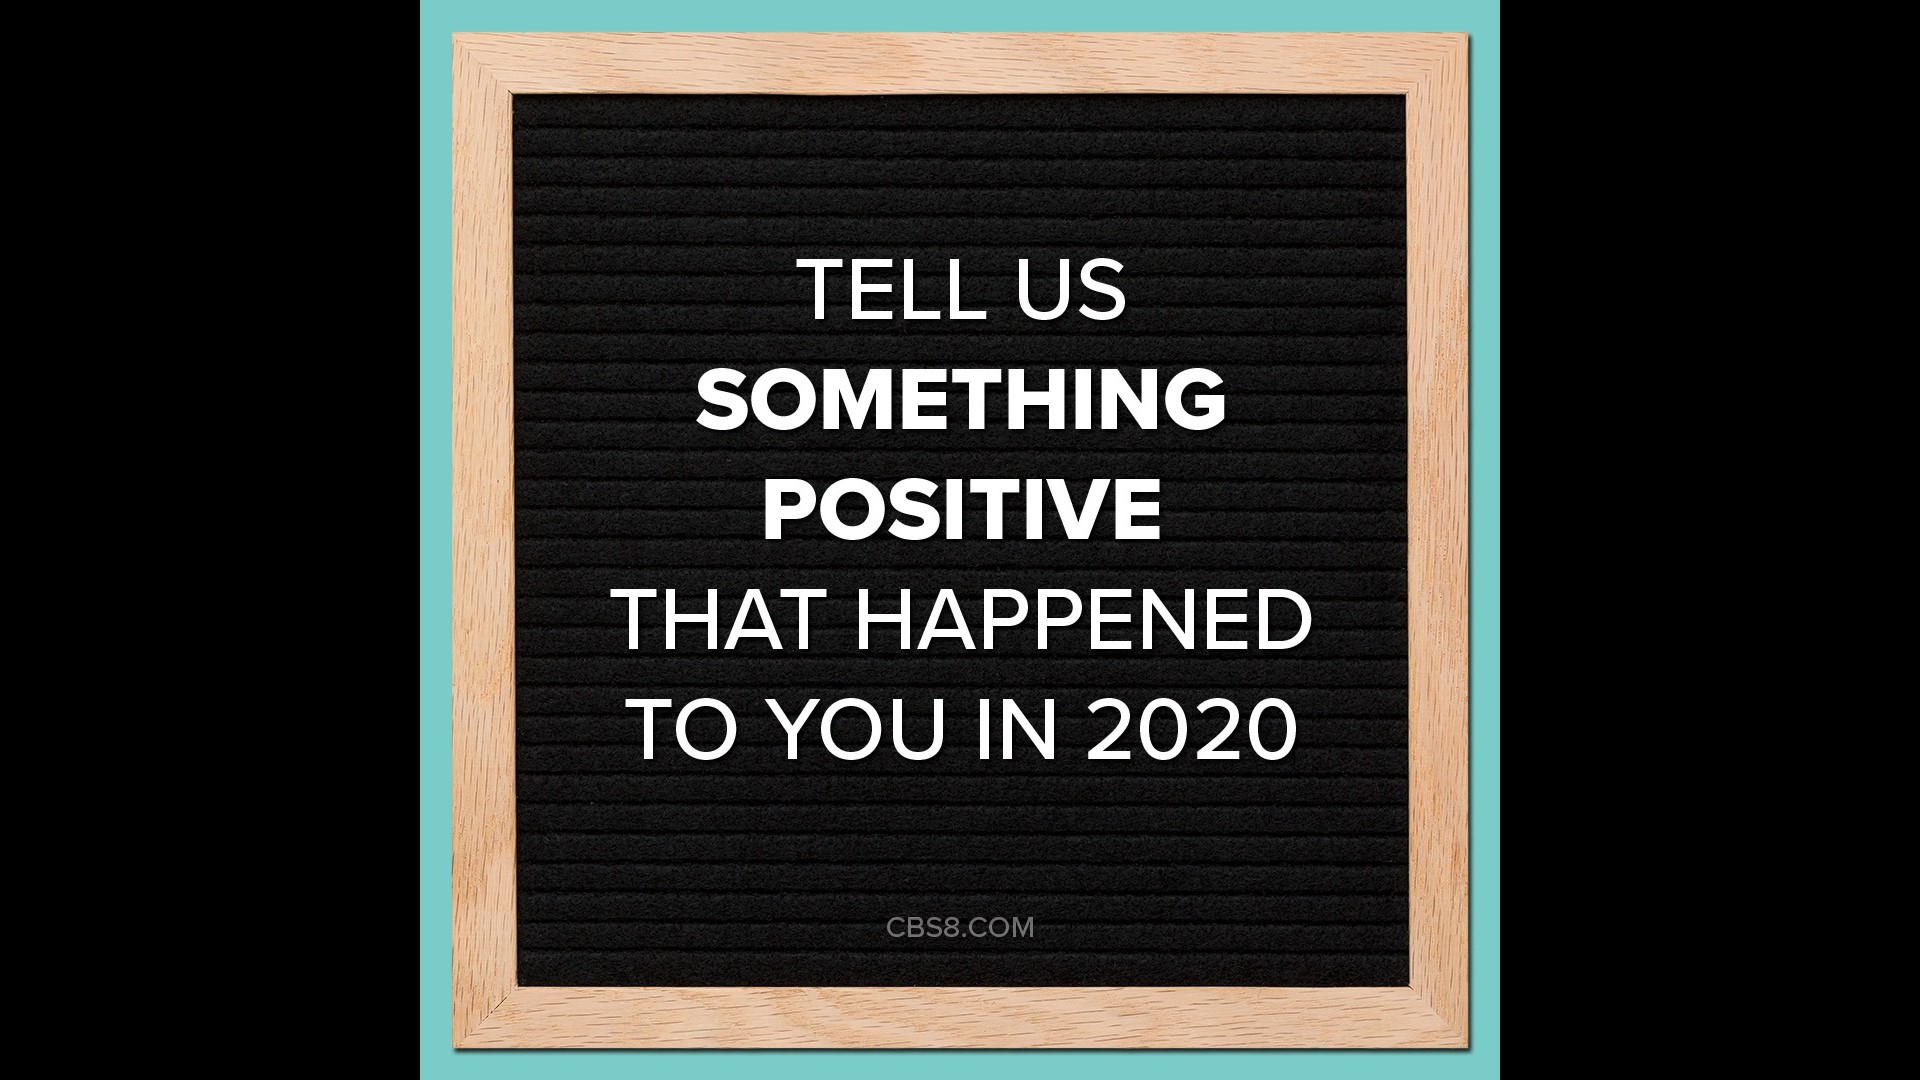 A Carlsbad woman’s Facebook post about posting positivity is making us pause to see the good that happened in 2020.